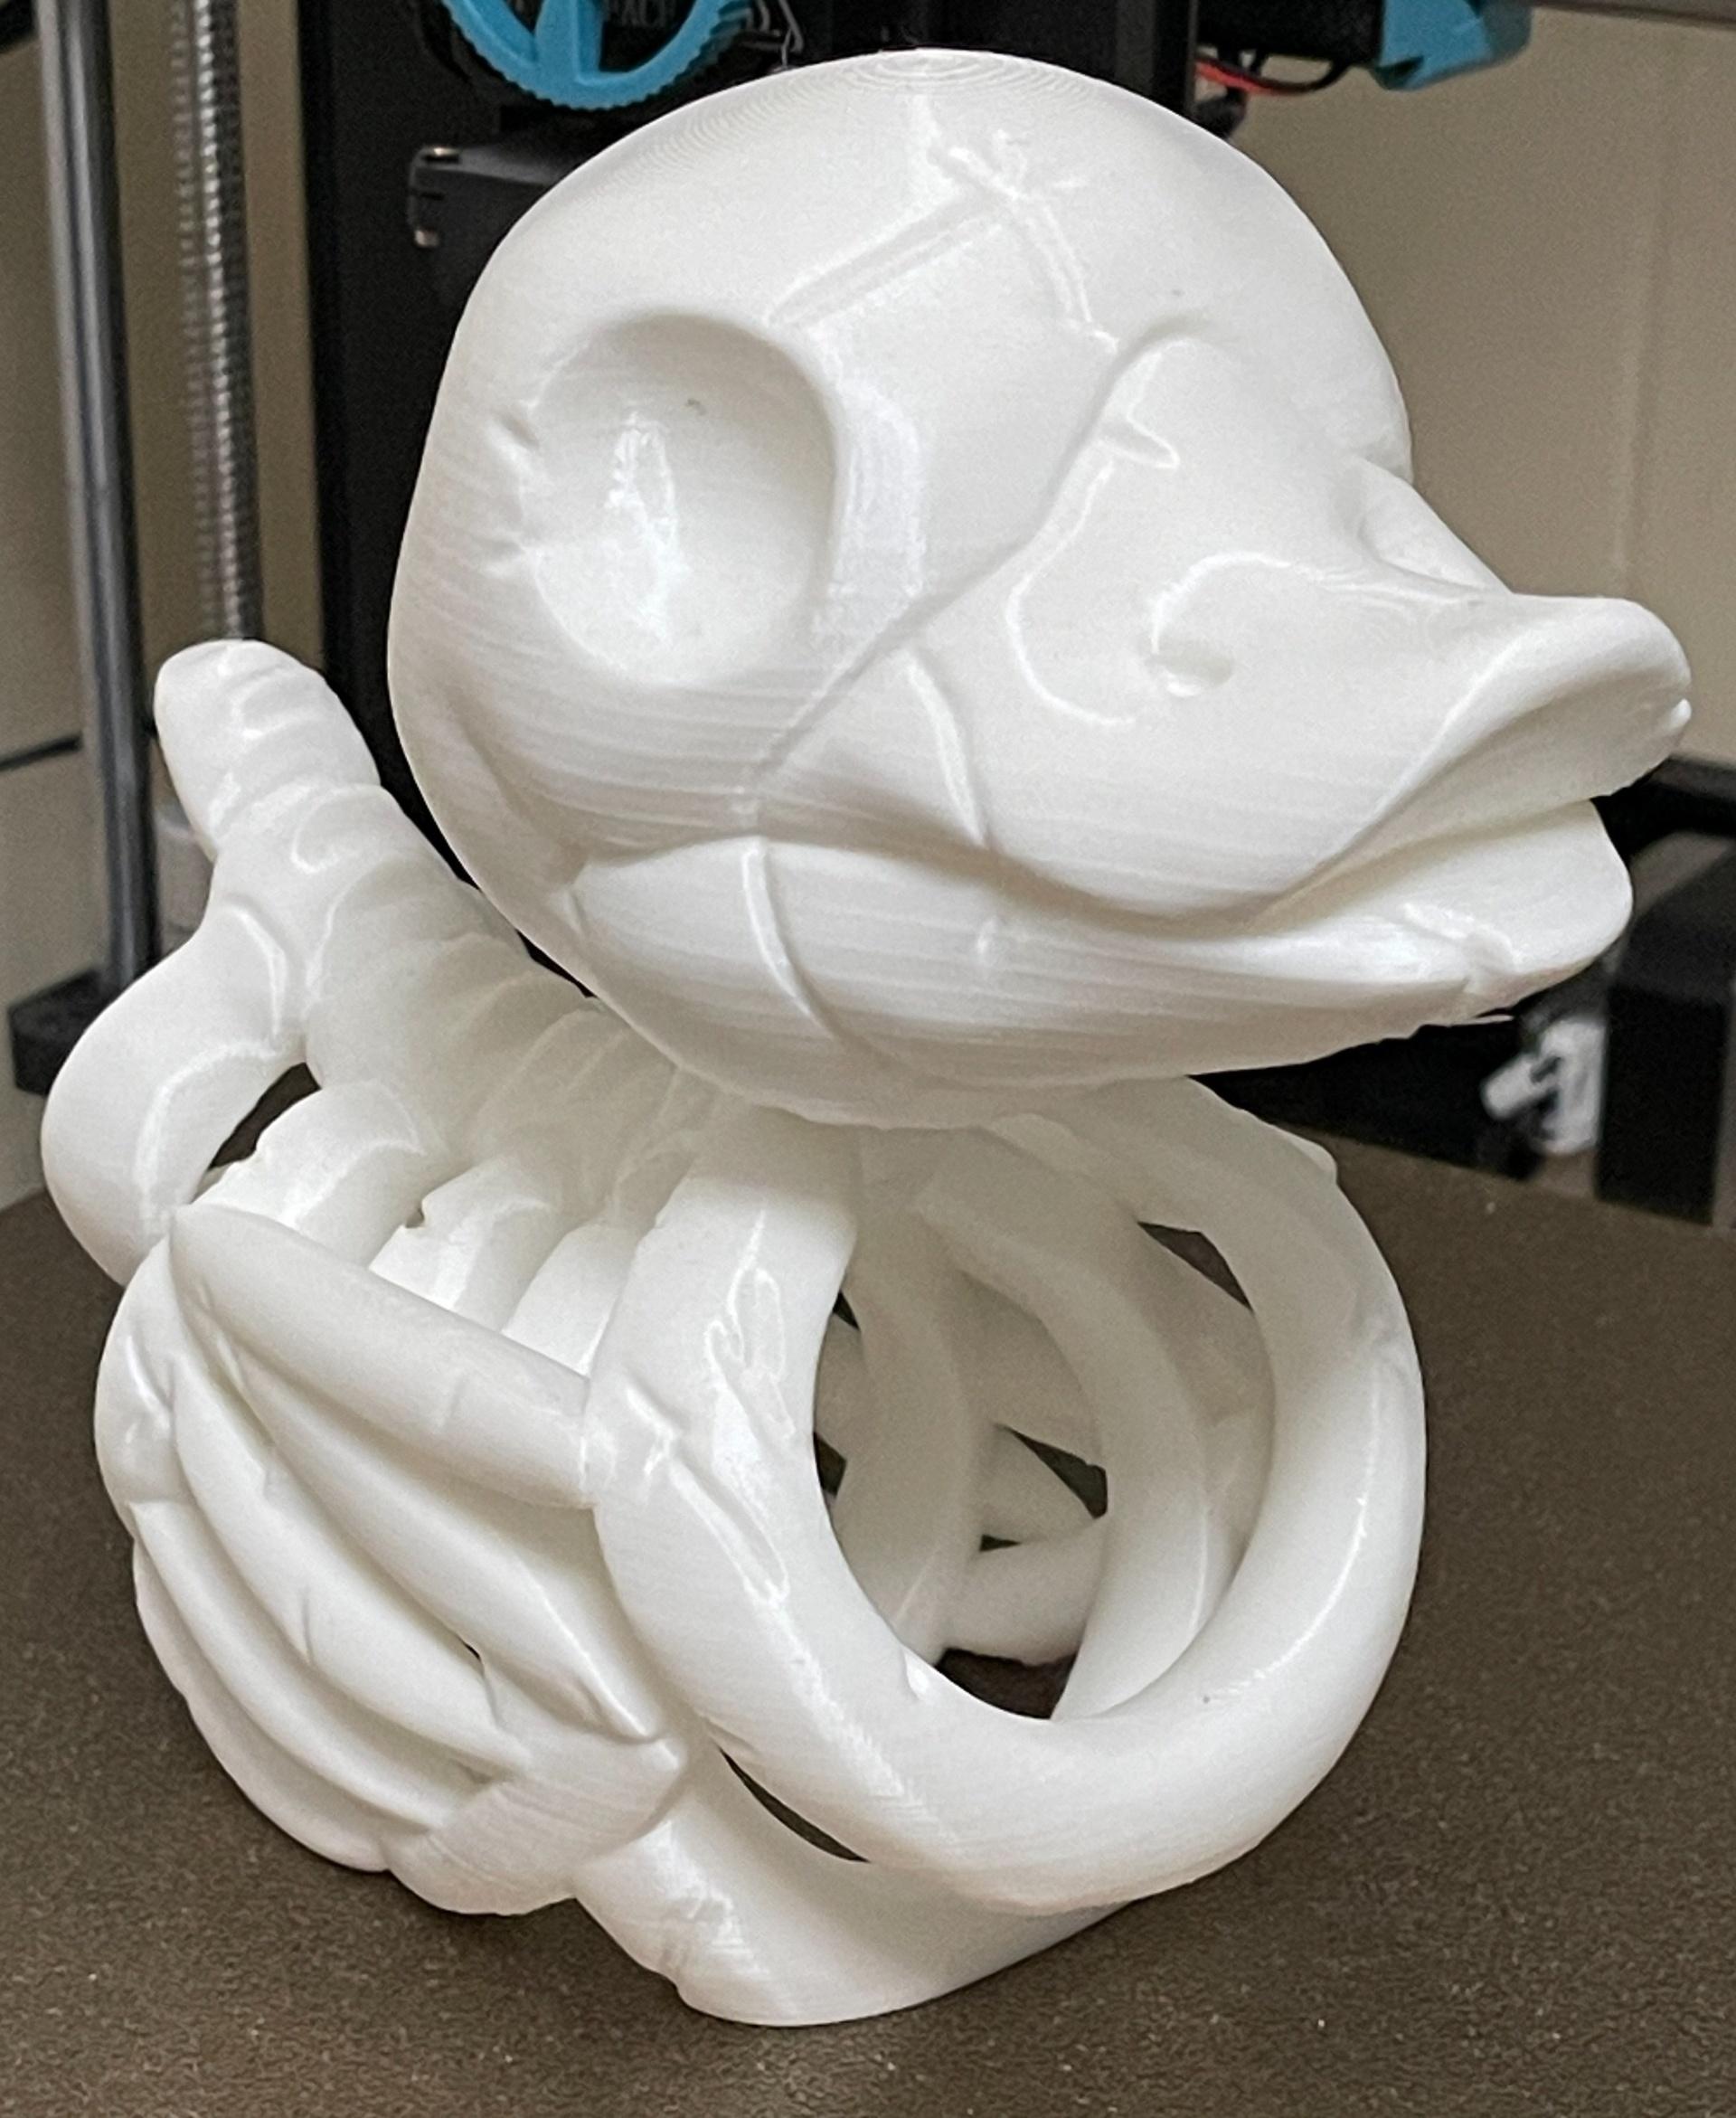 Skeleton Rubber Duck - Perfect use of the sample PLA that came with the printer. - 3d model